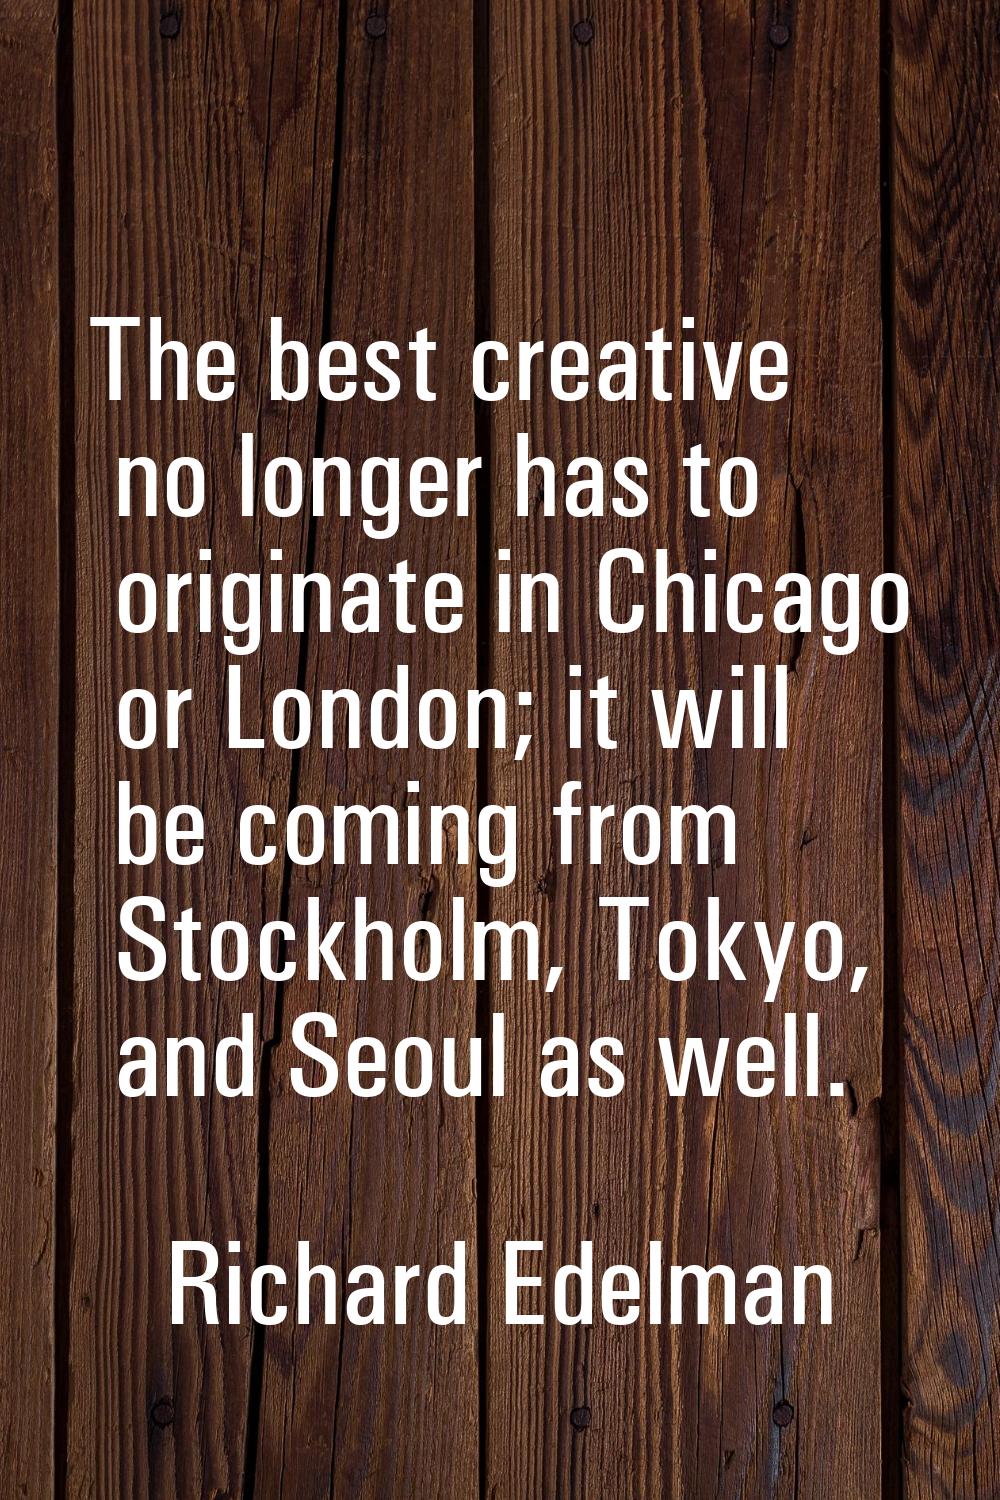 The best creative no longer has to originate in Chicago or London; it will be coming from Stockholm